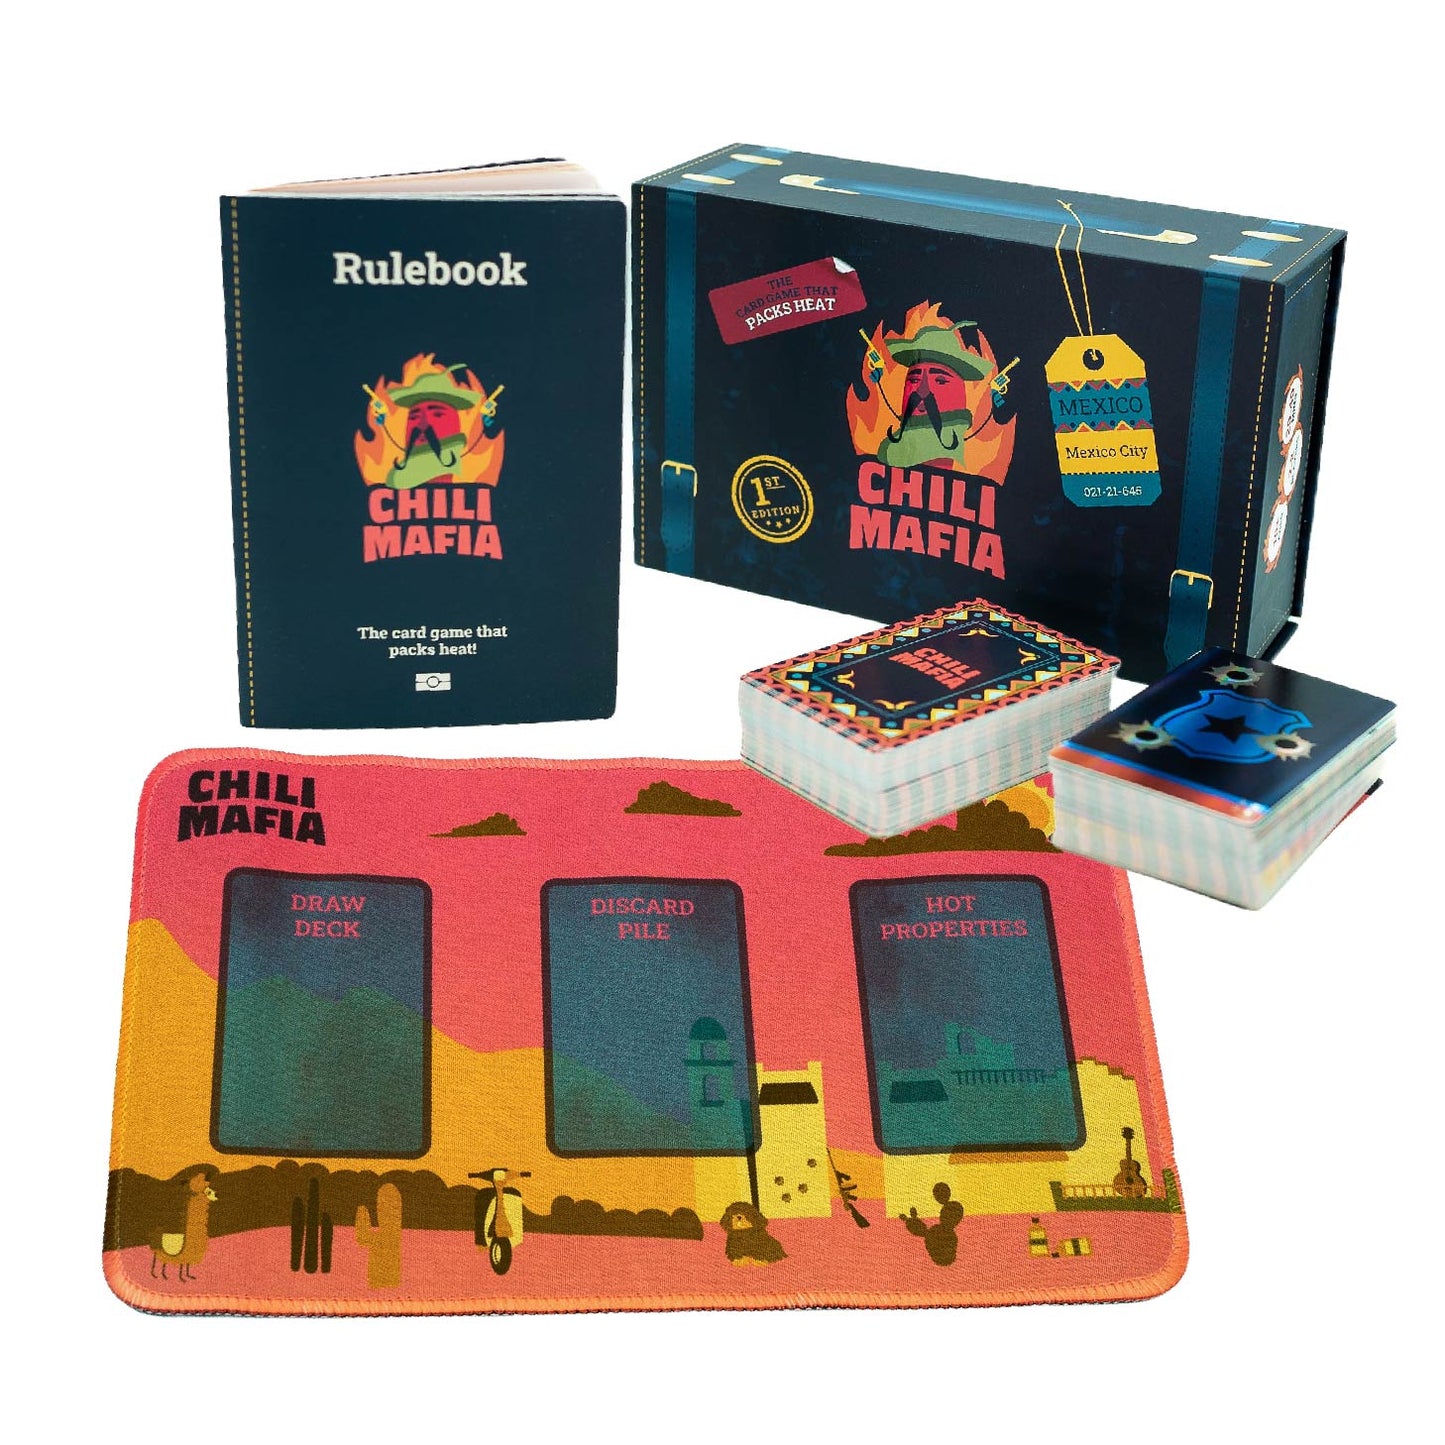 Chili Mafia with playmat. Add some spice to your next board game night with this set-collection card game for up to 8 people! Inspired by the spicy chili peppers of Mexico!